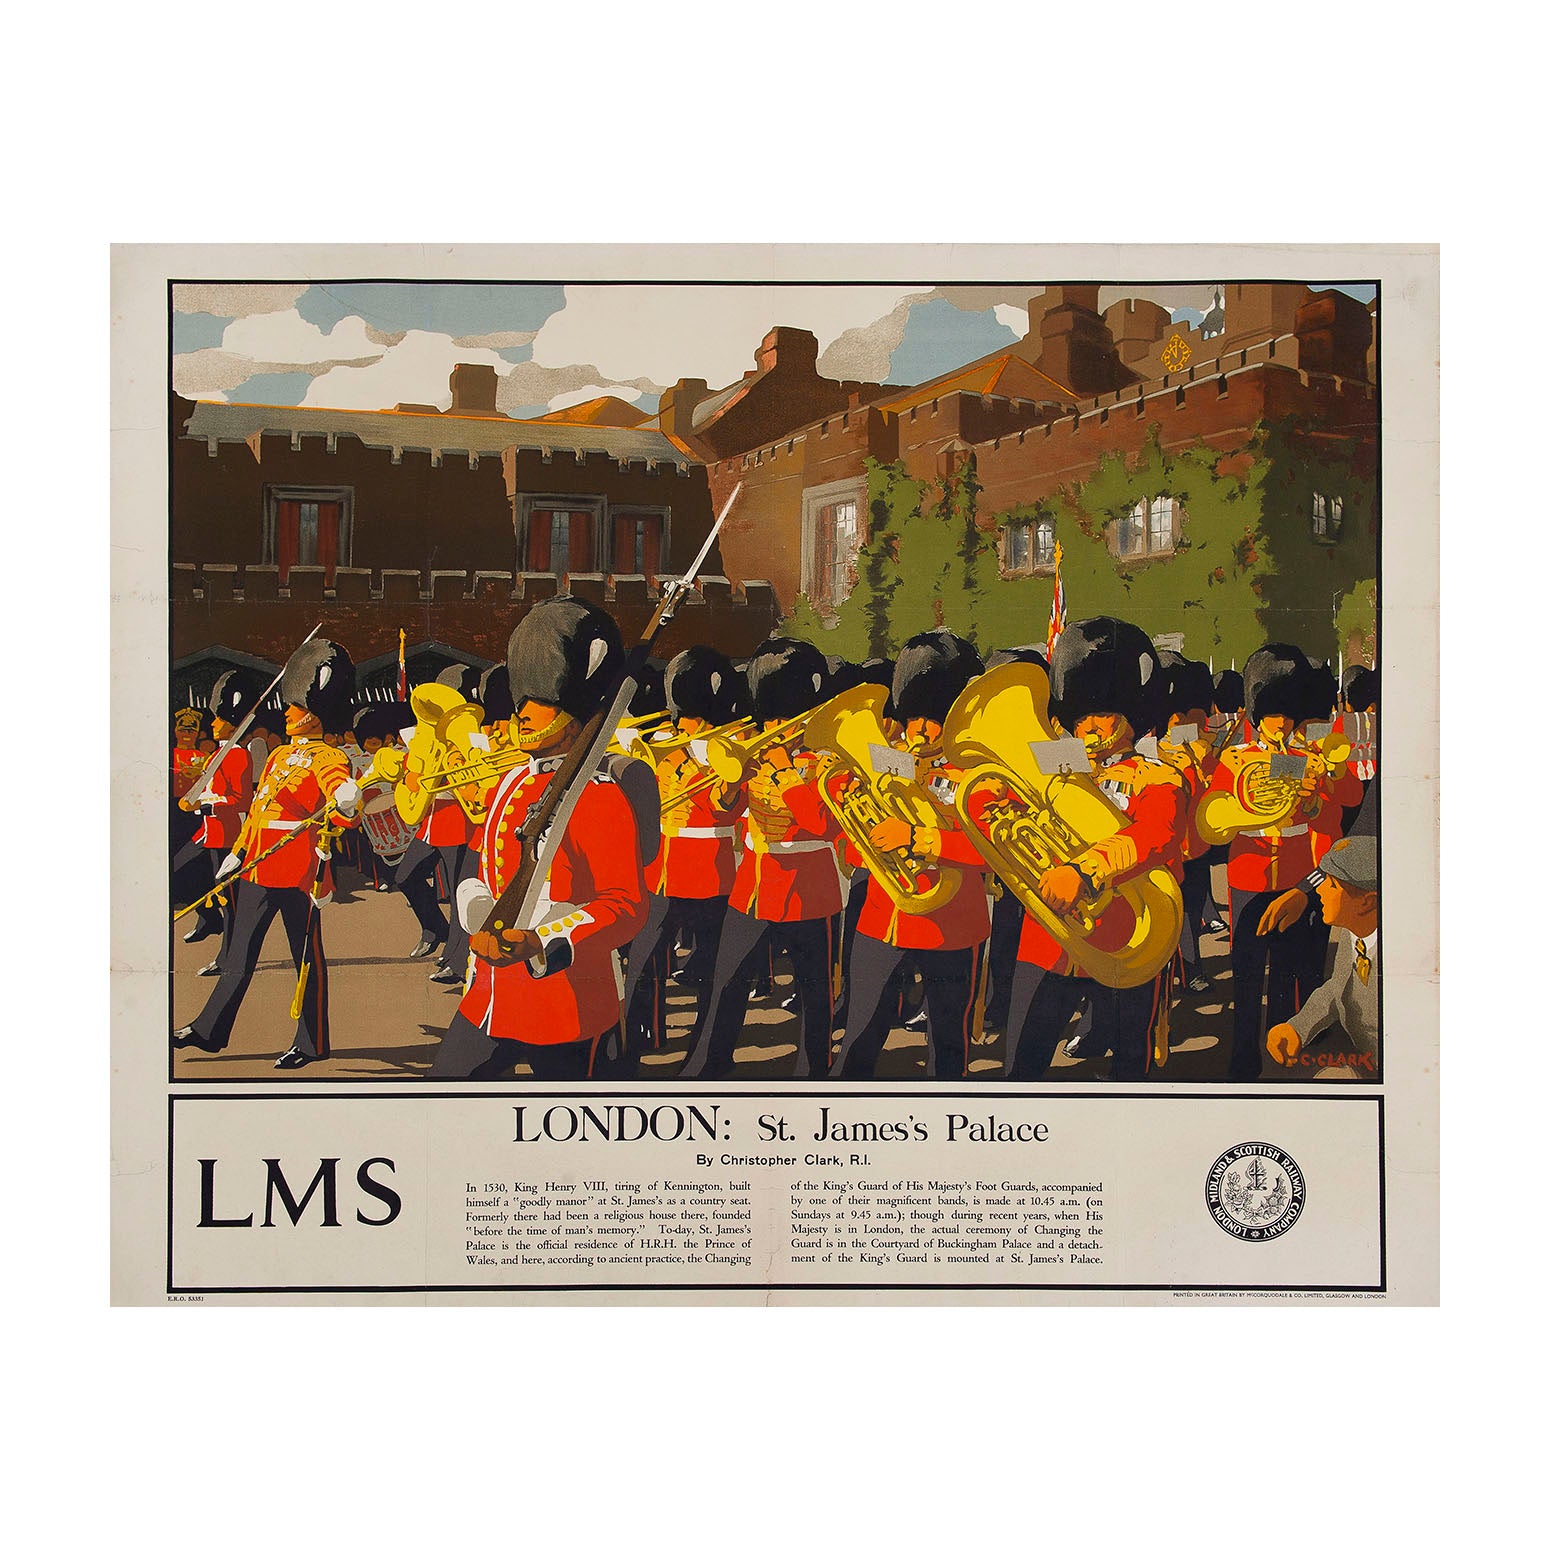 London Midland & Scottish Railway poster, London, St James's Palace, Christopher Clark R.I., 1932. Band of the Grenadier Guards at the changing of the guard ceremony